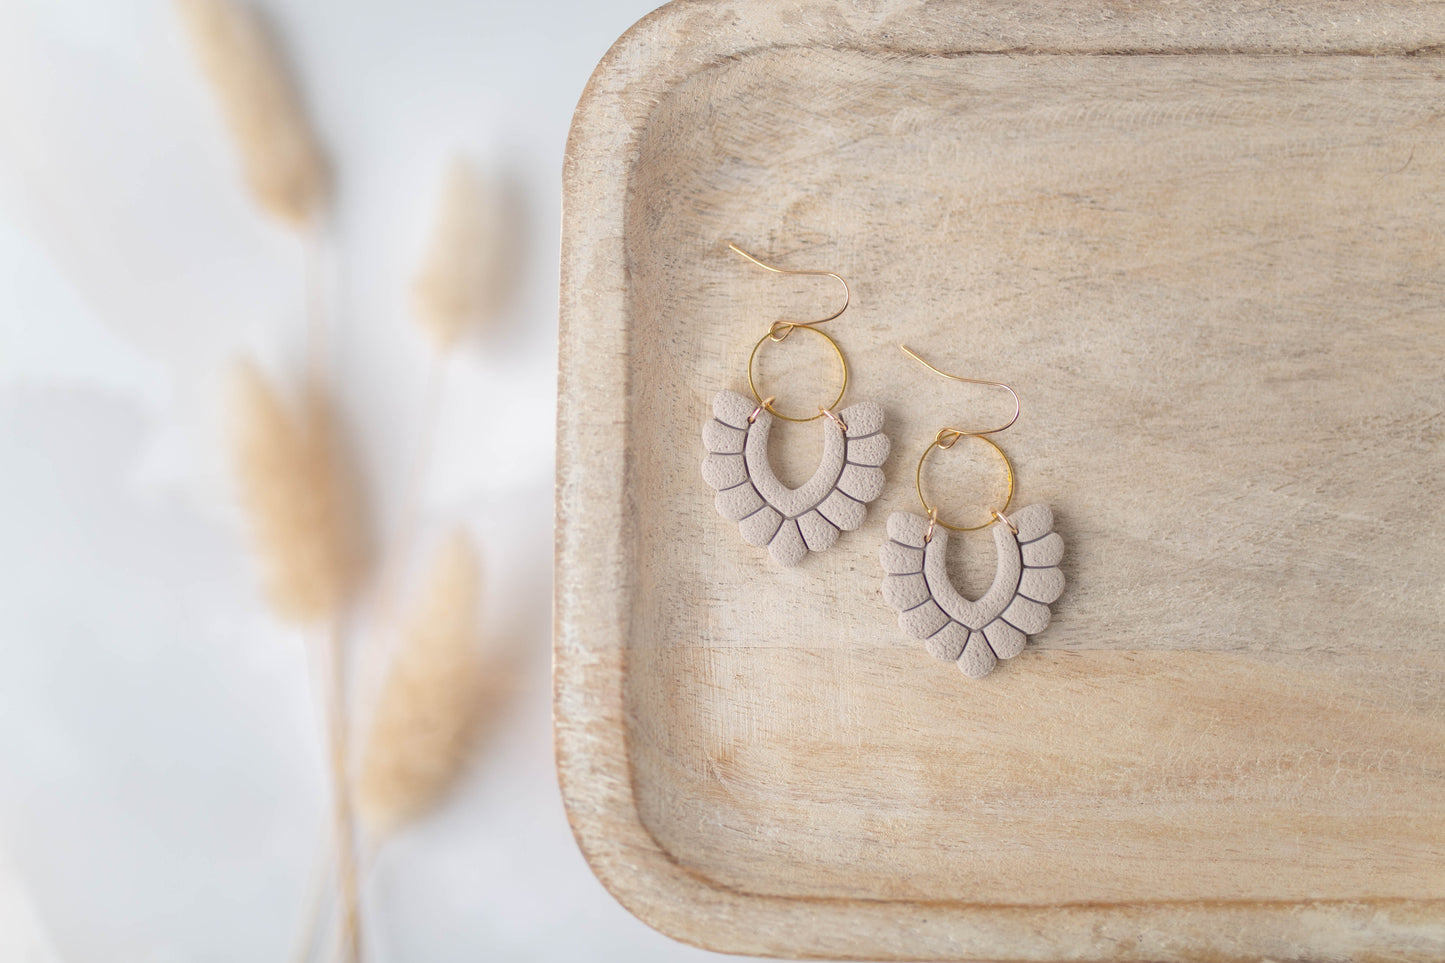 Clay Earrings | Scallop Dangles | All Things Fall Collection